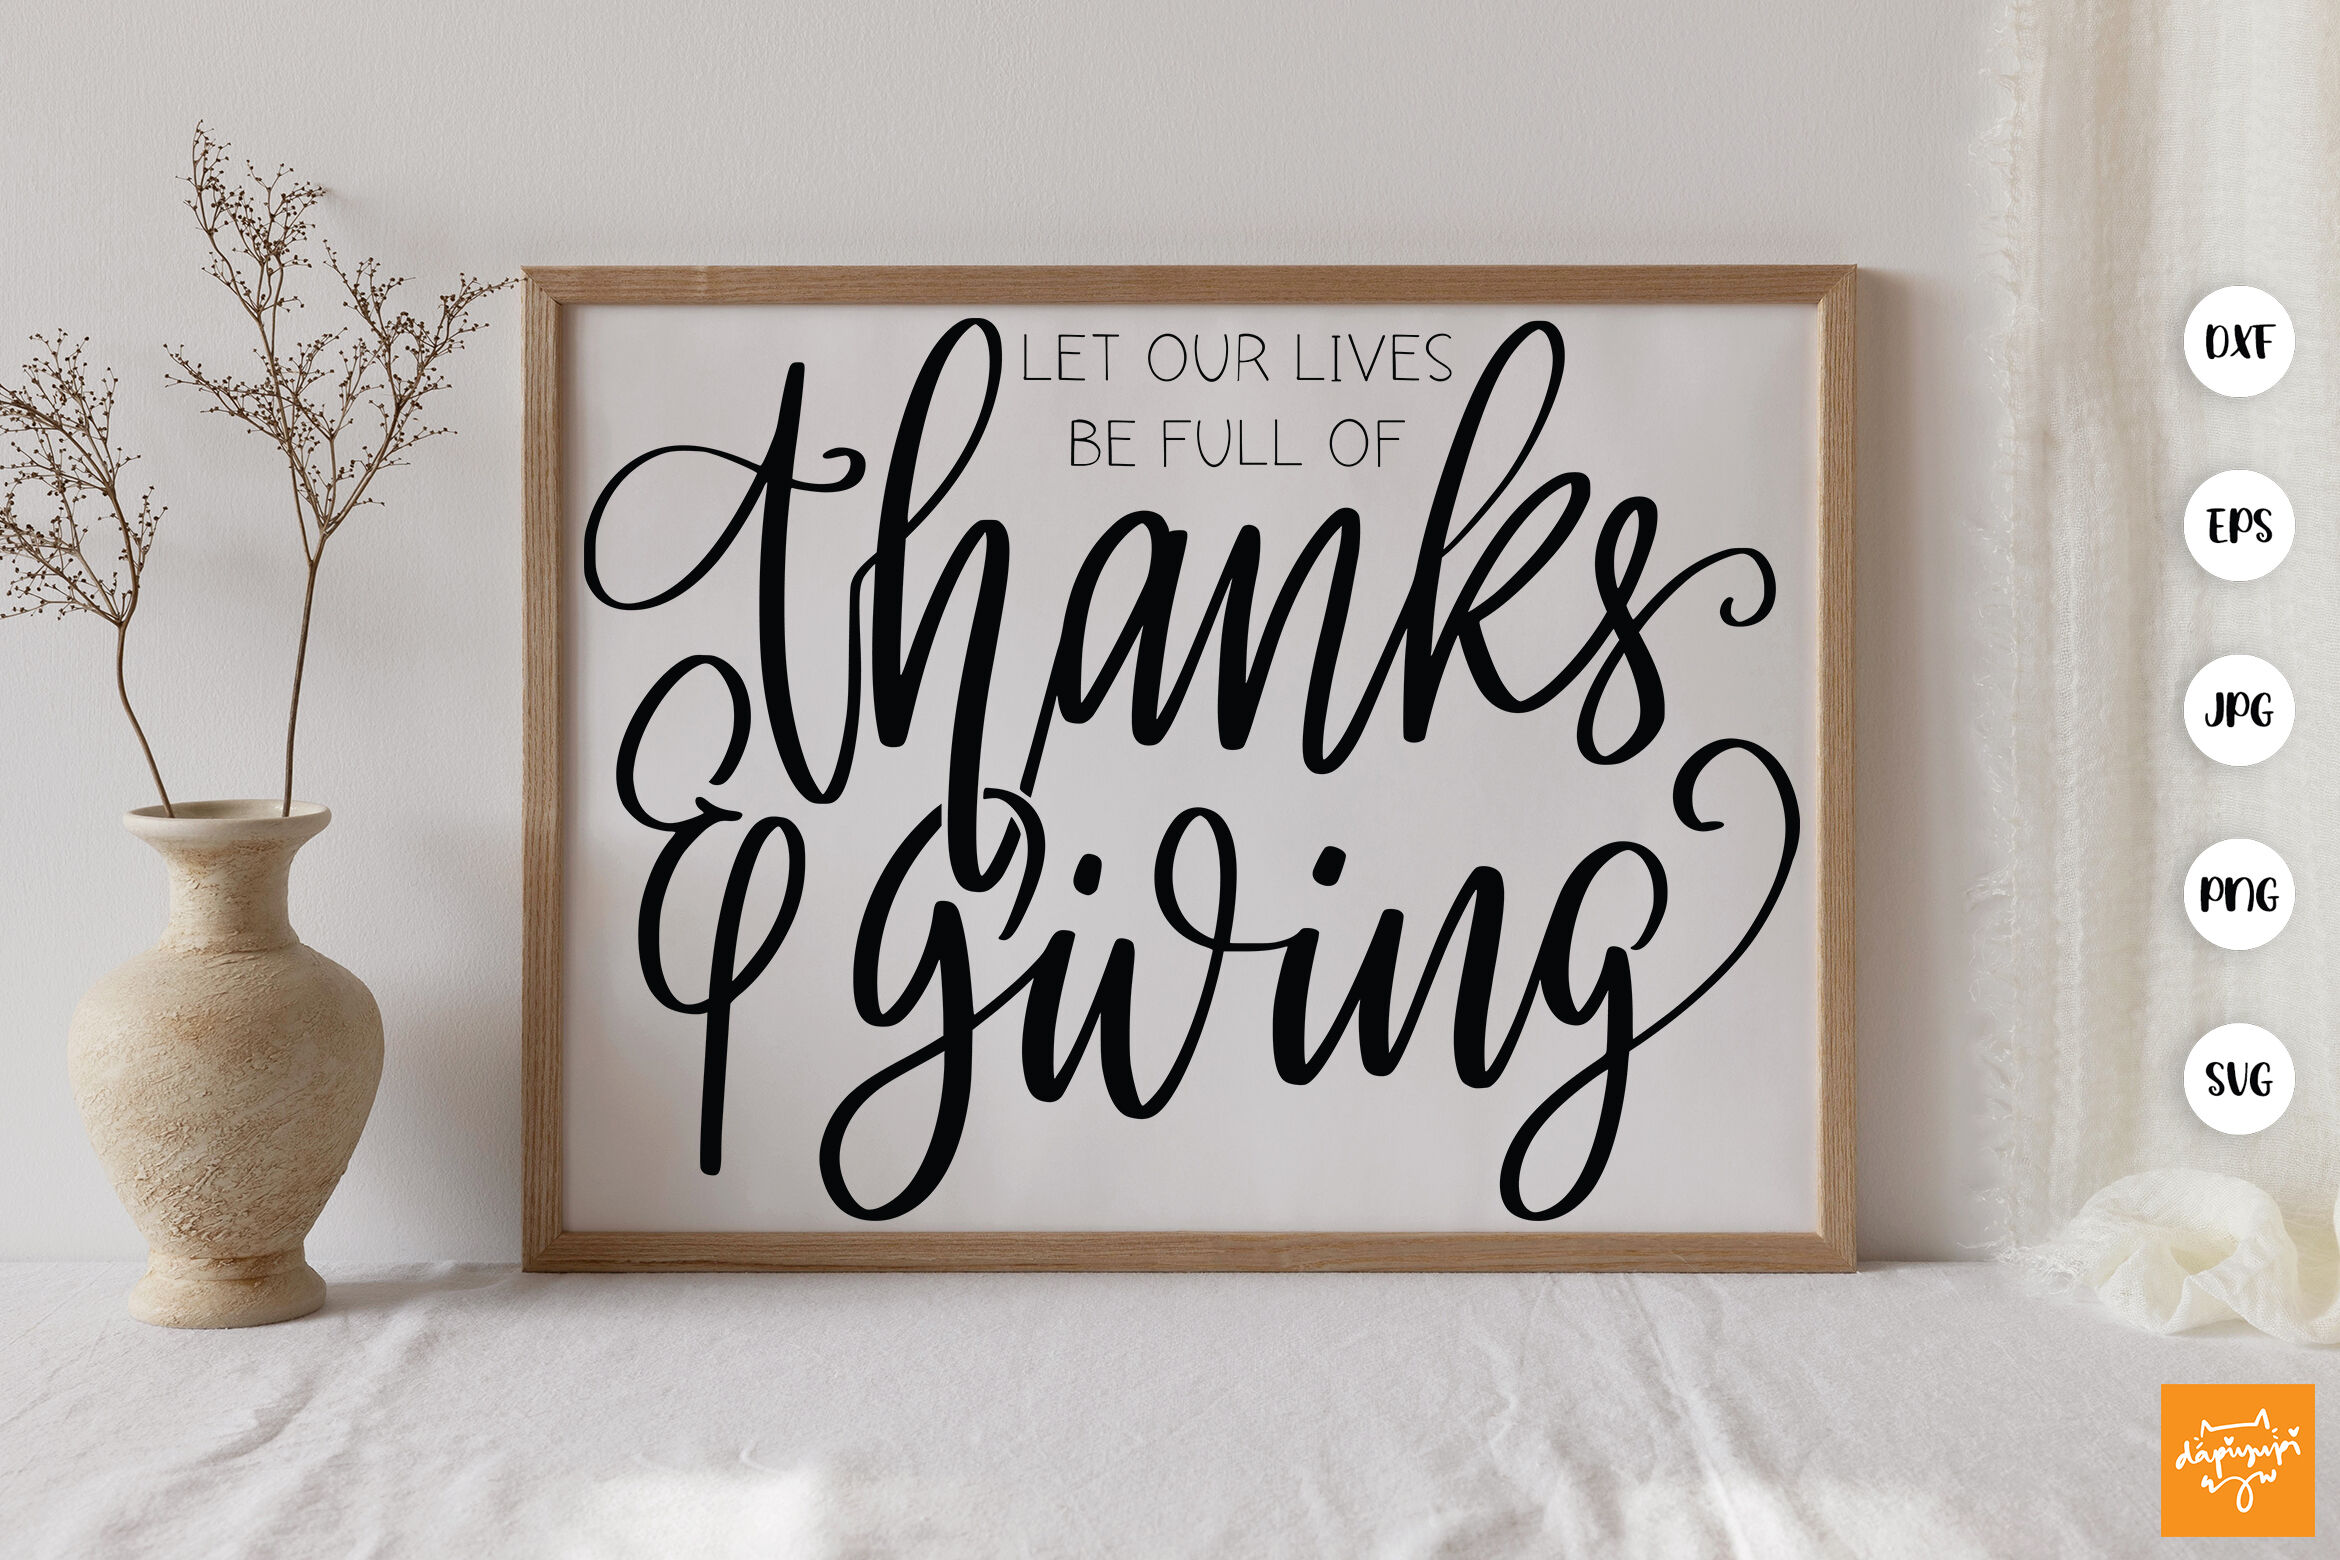 let-our-lives-be-full-of-thanks-and-giving-svg-thanksgiving-quotes-by